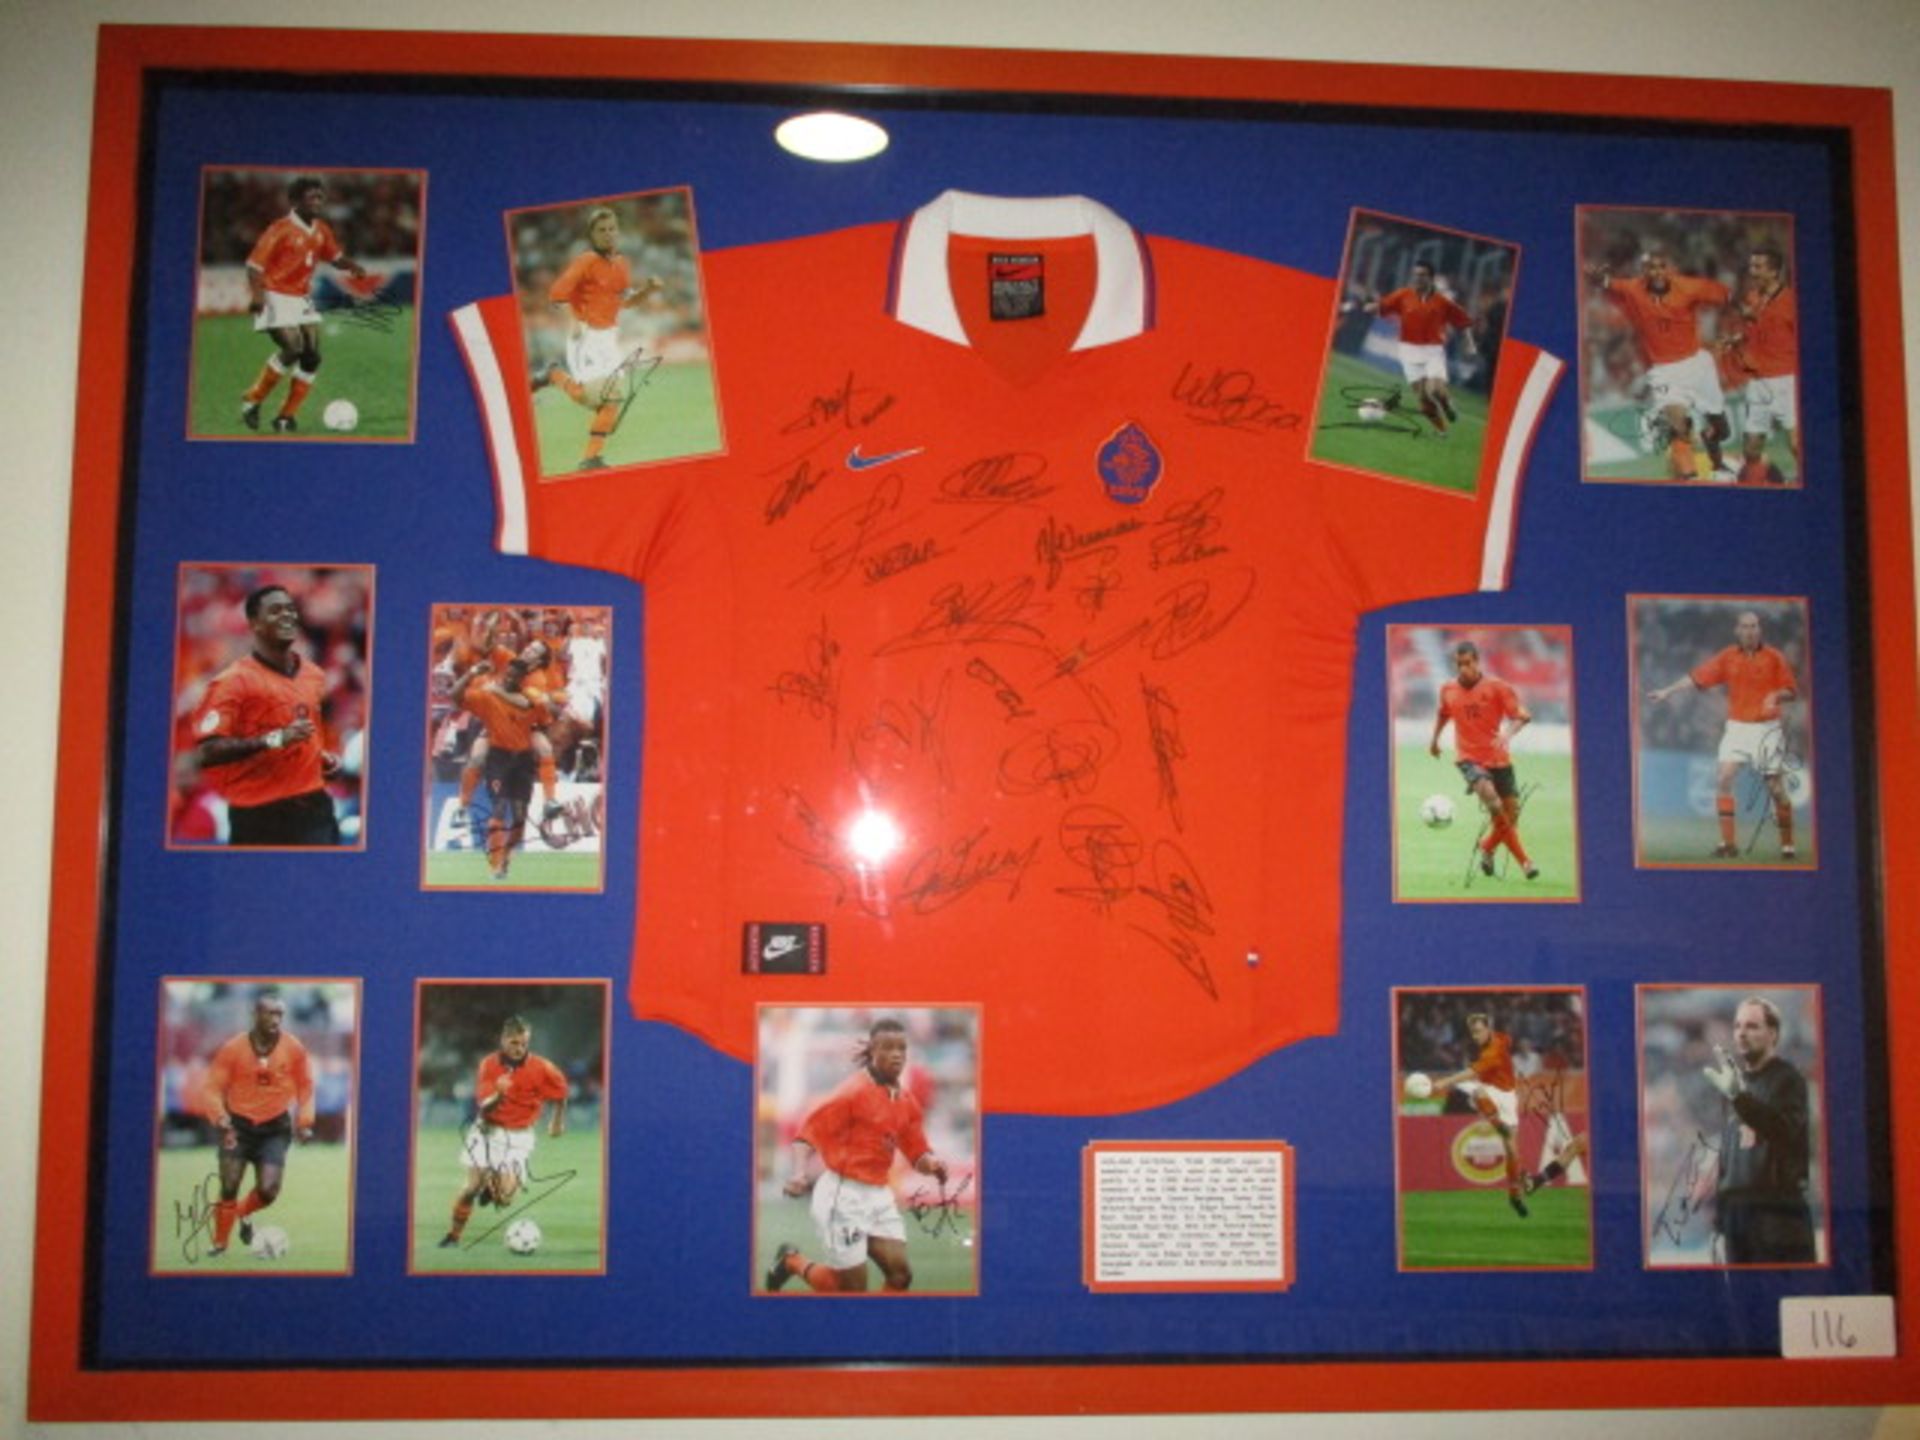 Holland National Team jersey signed by members of the 1998 World Cup team in France - 20